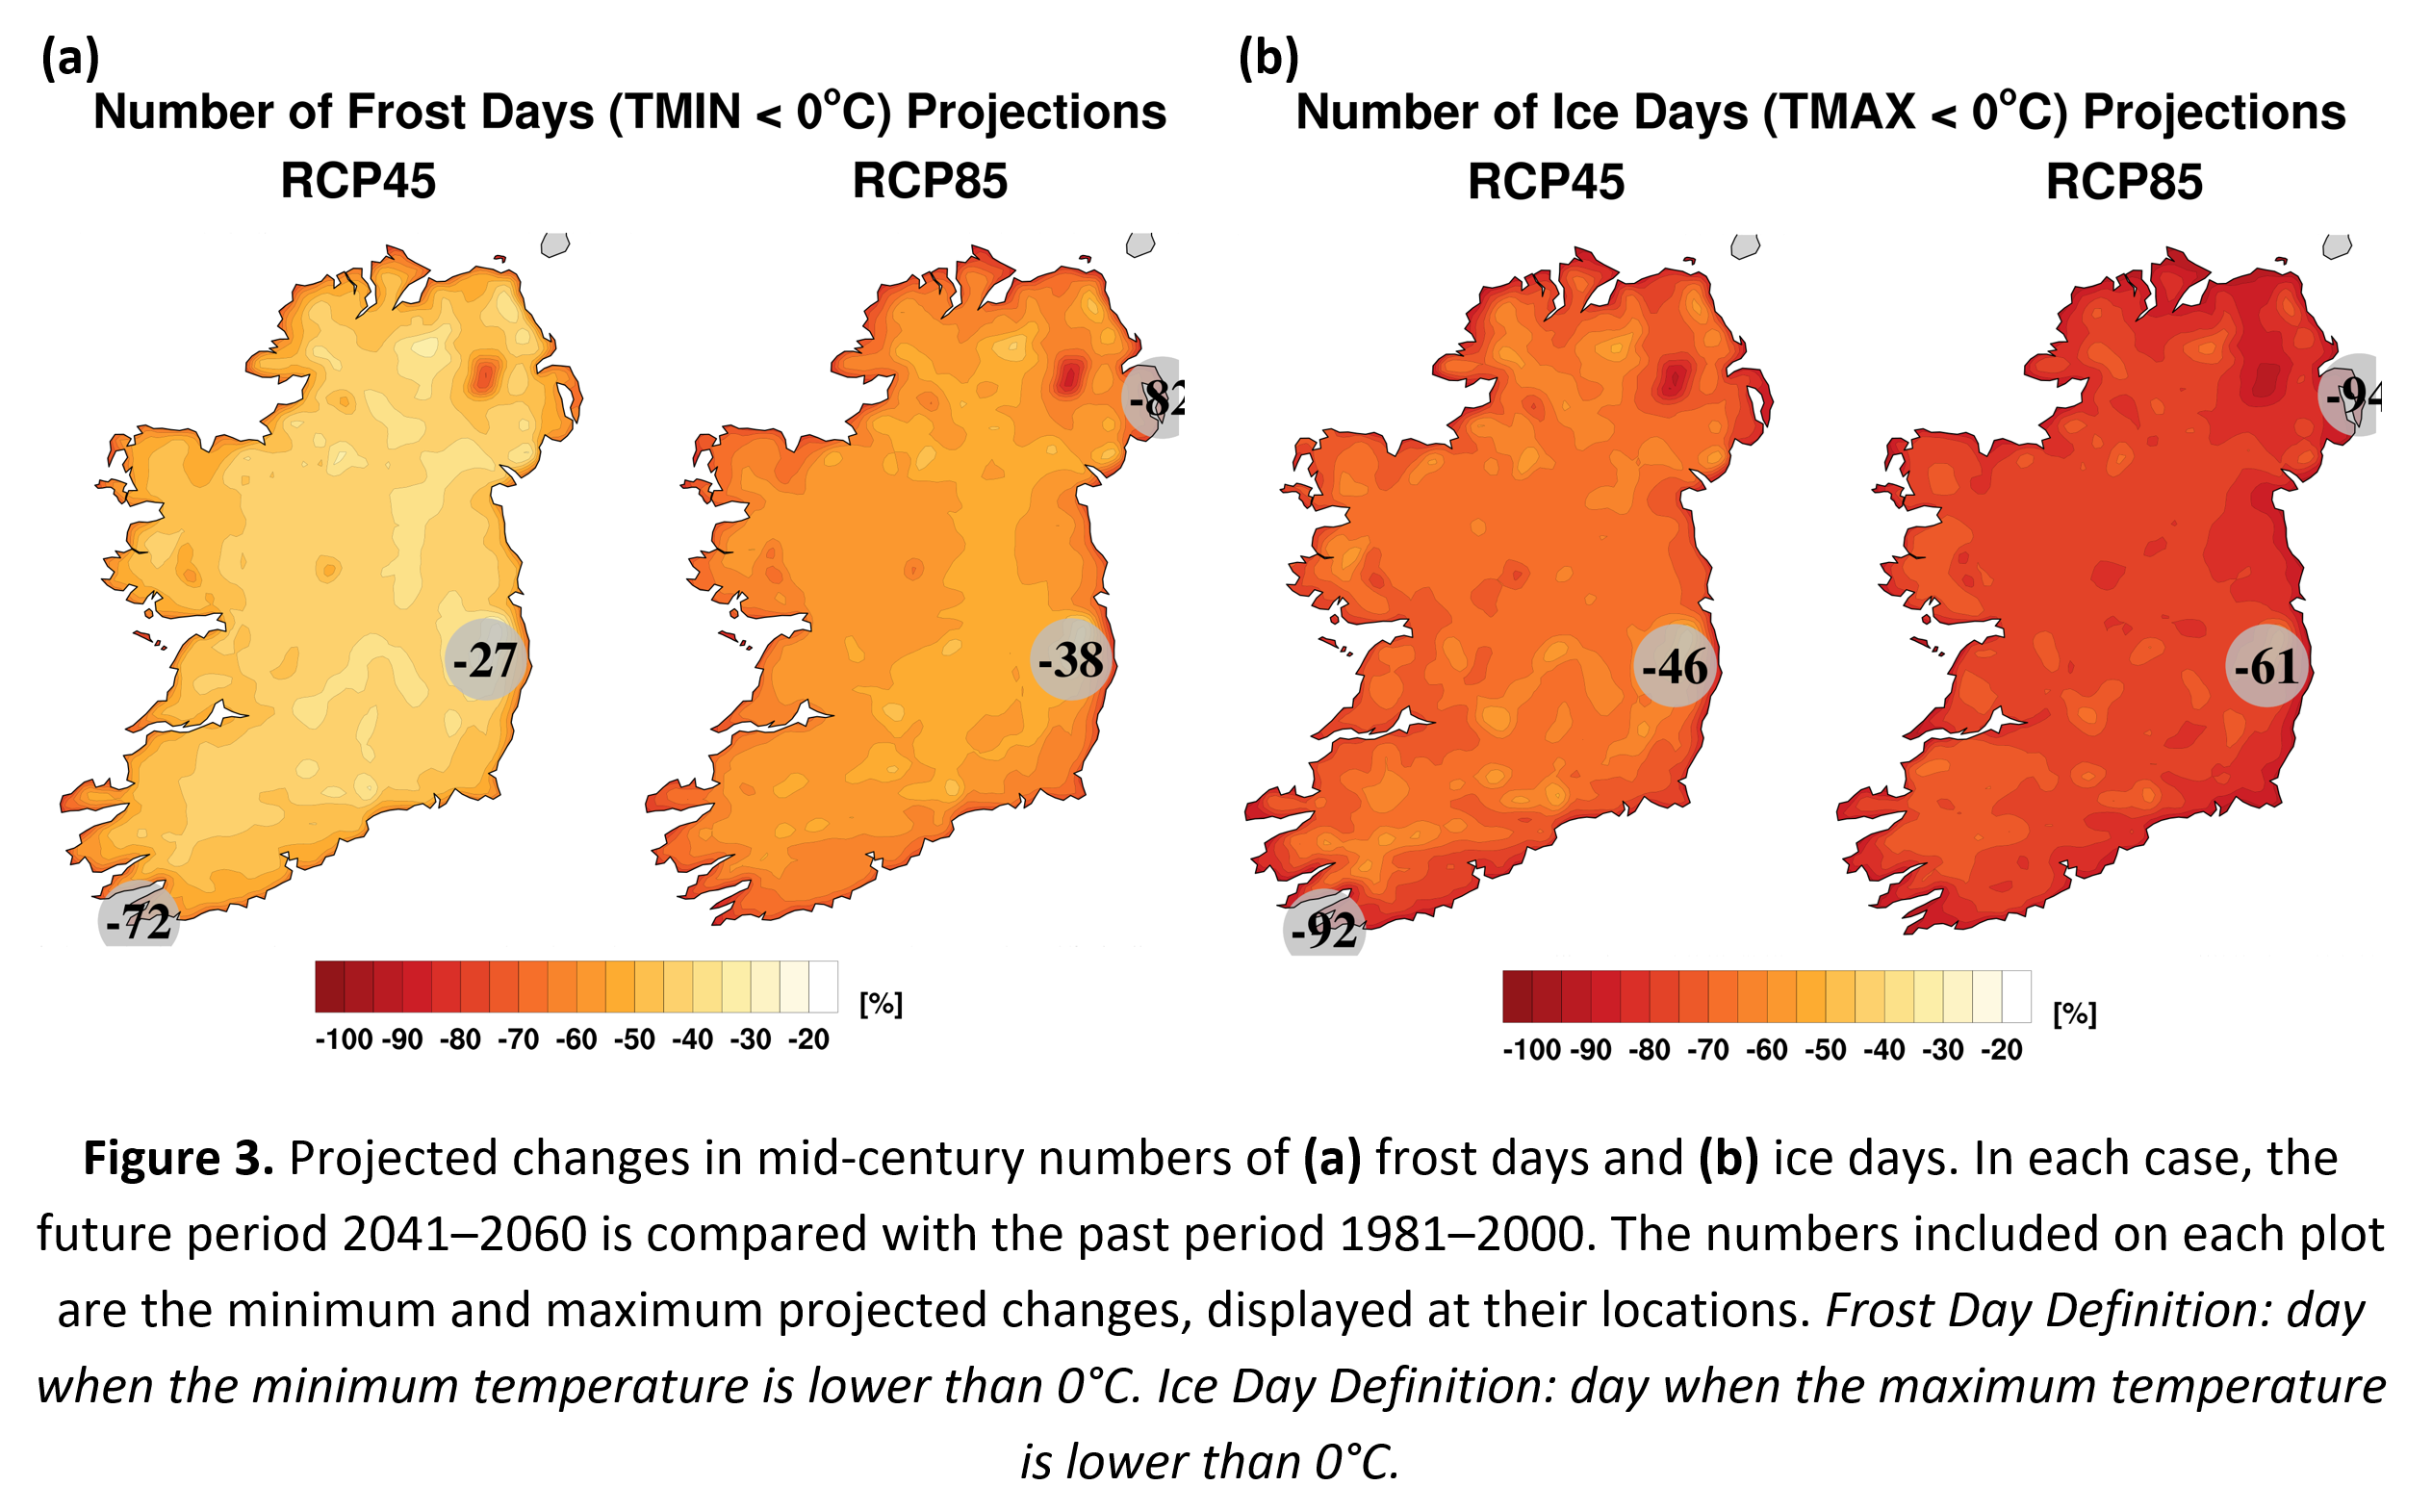 Figure 3. Projected changes in mid-century numbers of (a) frost days and (b) ice days. In each case, the future period 2041–2060 is compared with the past period 1981–2000. The numbers included on each plot are the minimum and maximum projected changes, displayed at their locations. Frost Day Definition: day when the minimum temperature is lower than 0°C. Ice Day Definition: day when the maximum temperature is lower than 0°C.